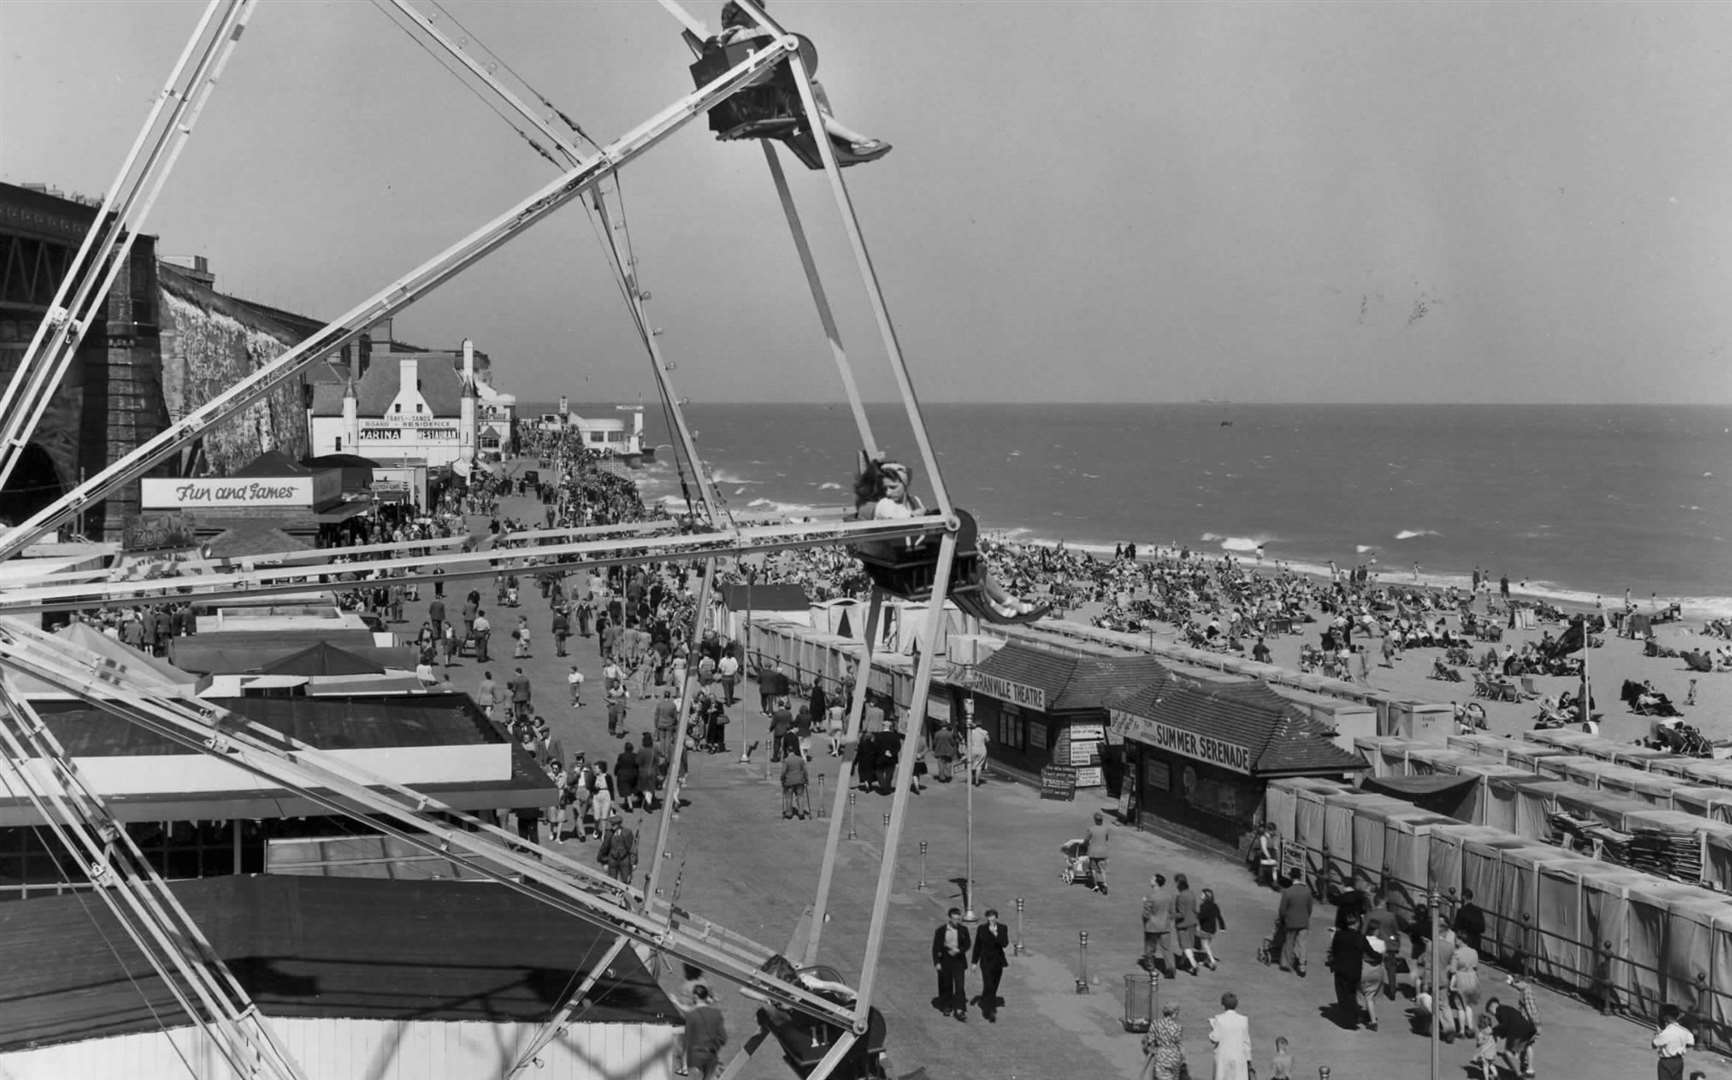 Merrie England offered a host of entertainment and fairground rides for visitors